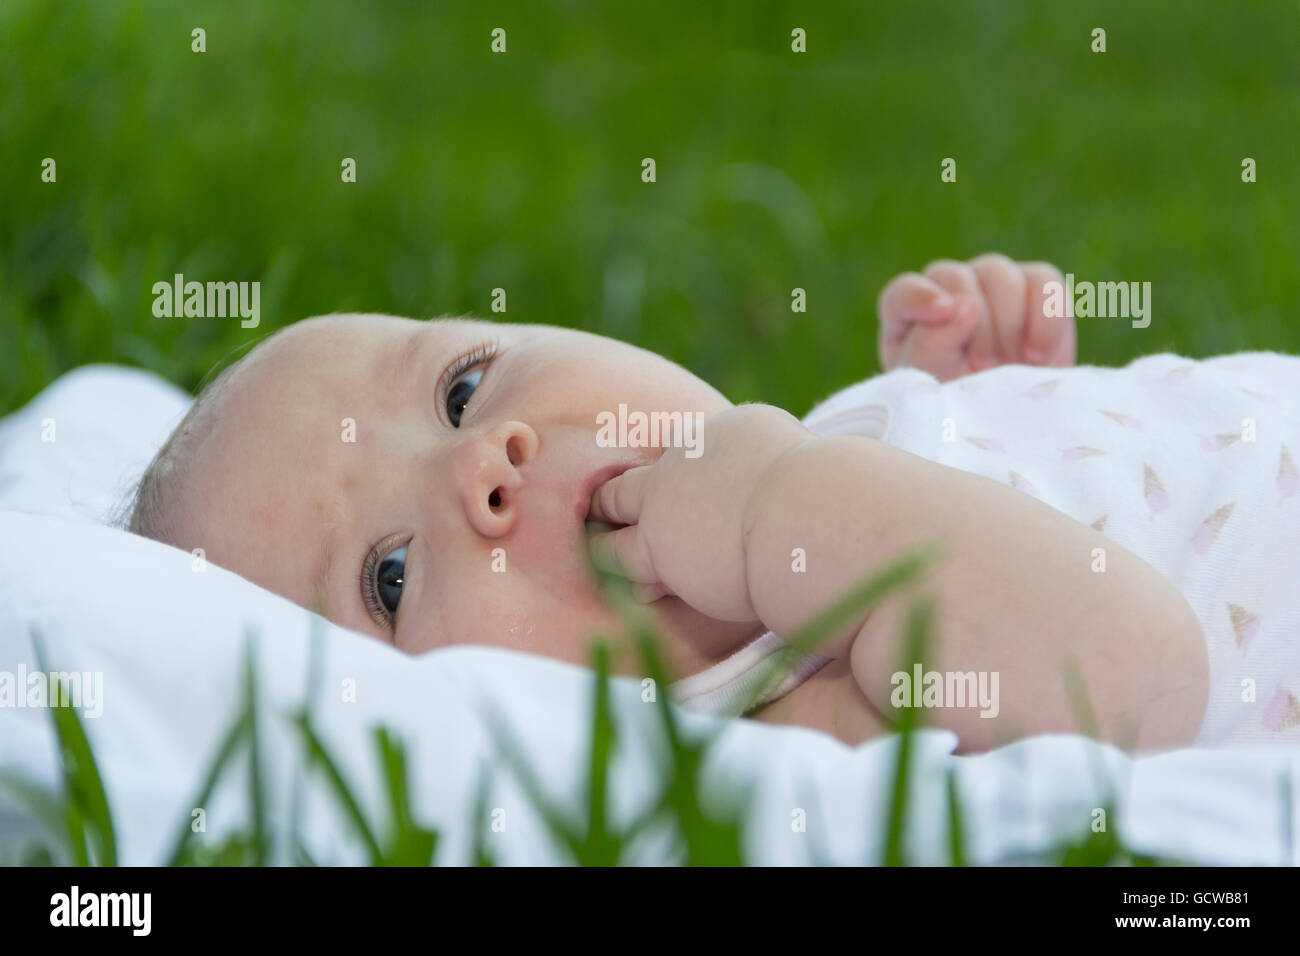 newborn baby lies on grass in park with hand in mouth Stock Photo